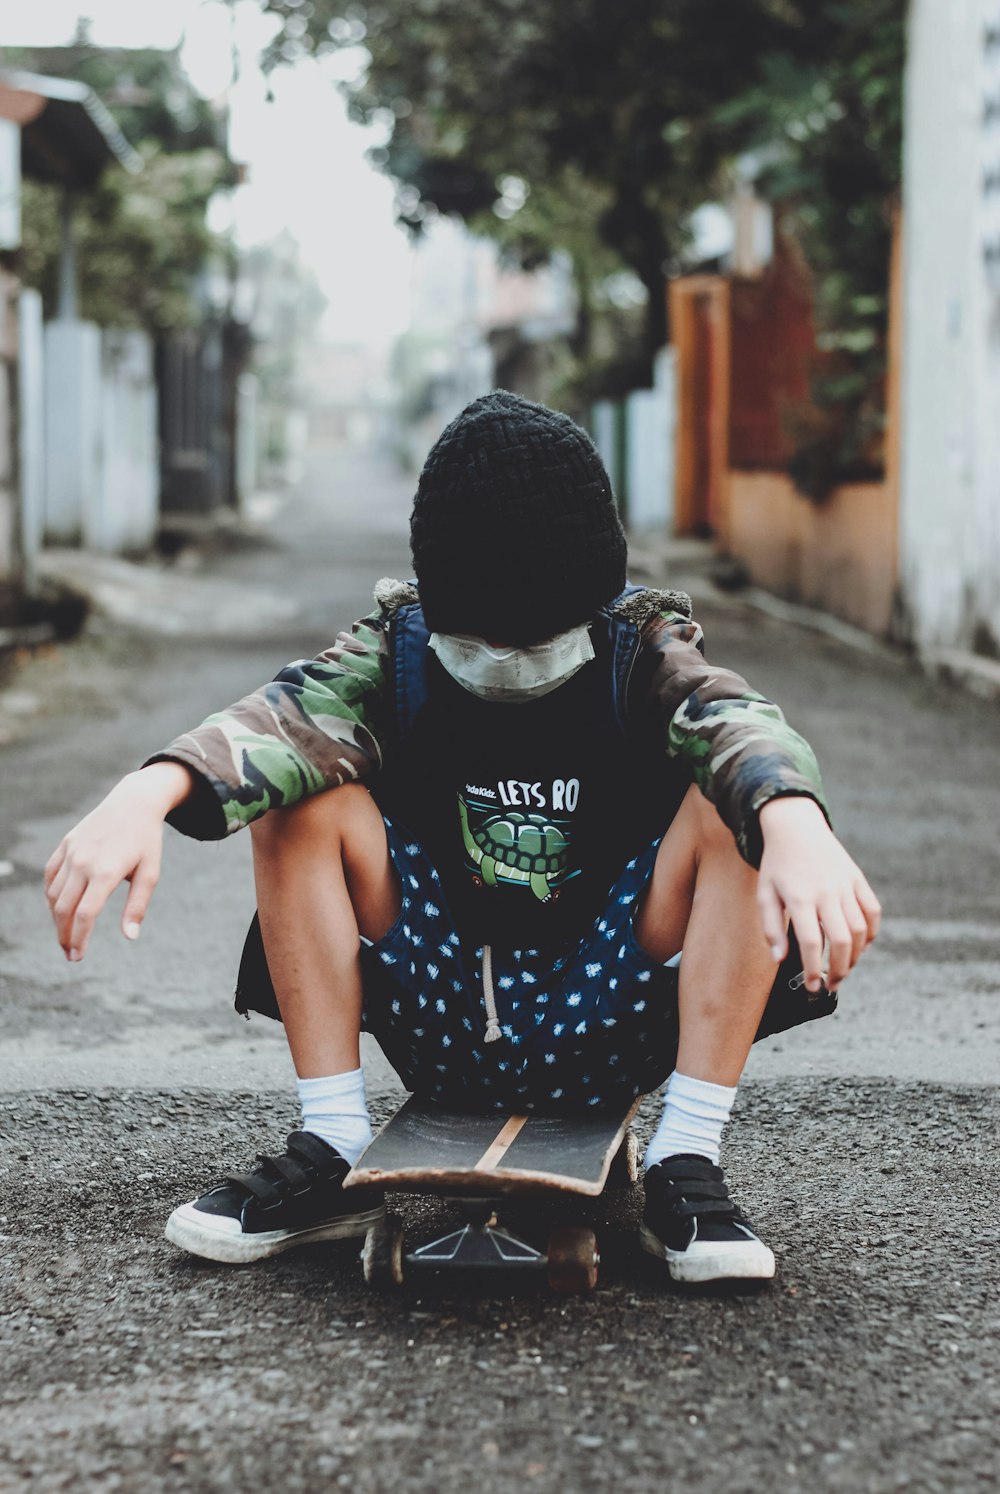 child in black and green shirt and black pants wearing black knit cap sitting on concrete